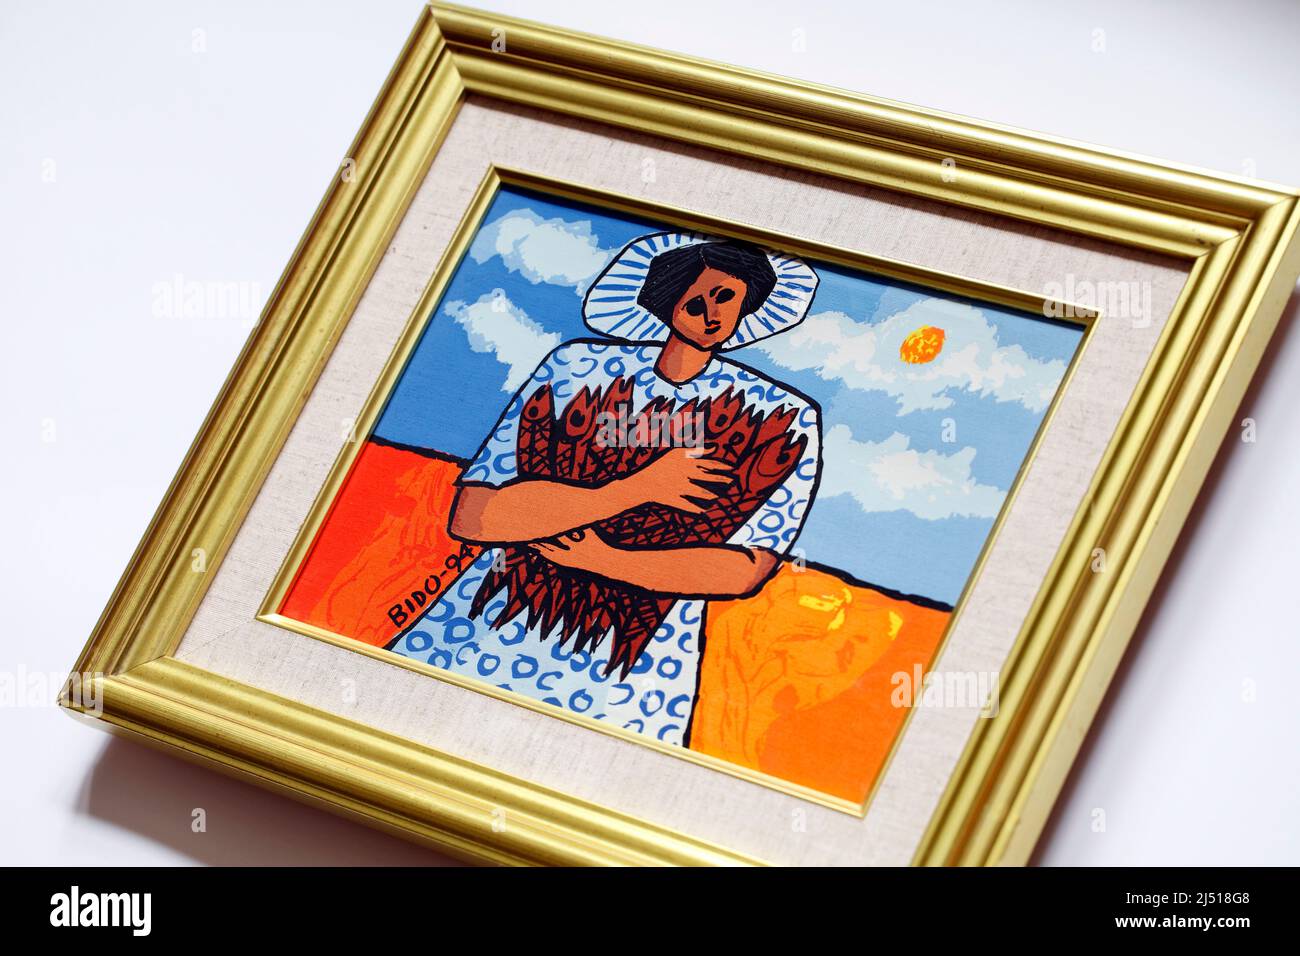 Canvas Screen print by Candido Bido, typical of his style with bright coloursa, the sun and a woman from the Dominican Republic, here  holding 9 fish Stock Photo